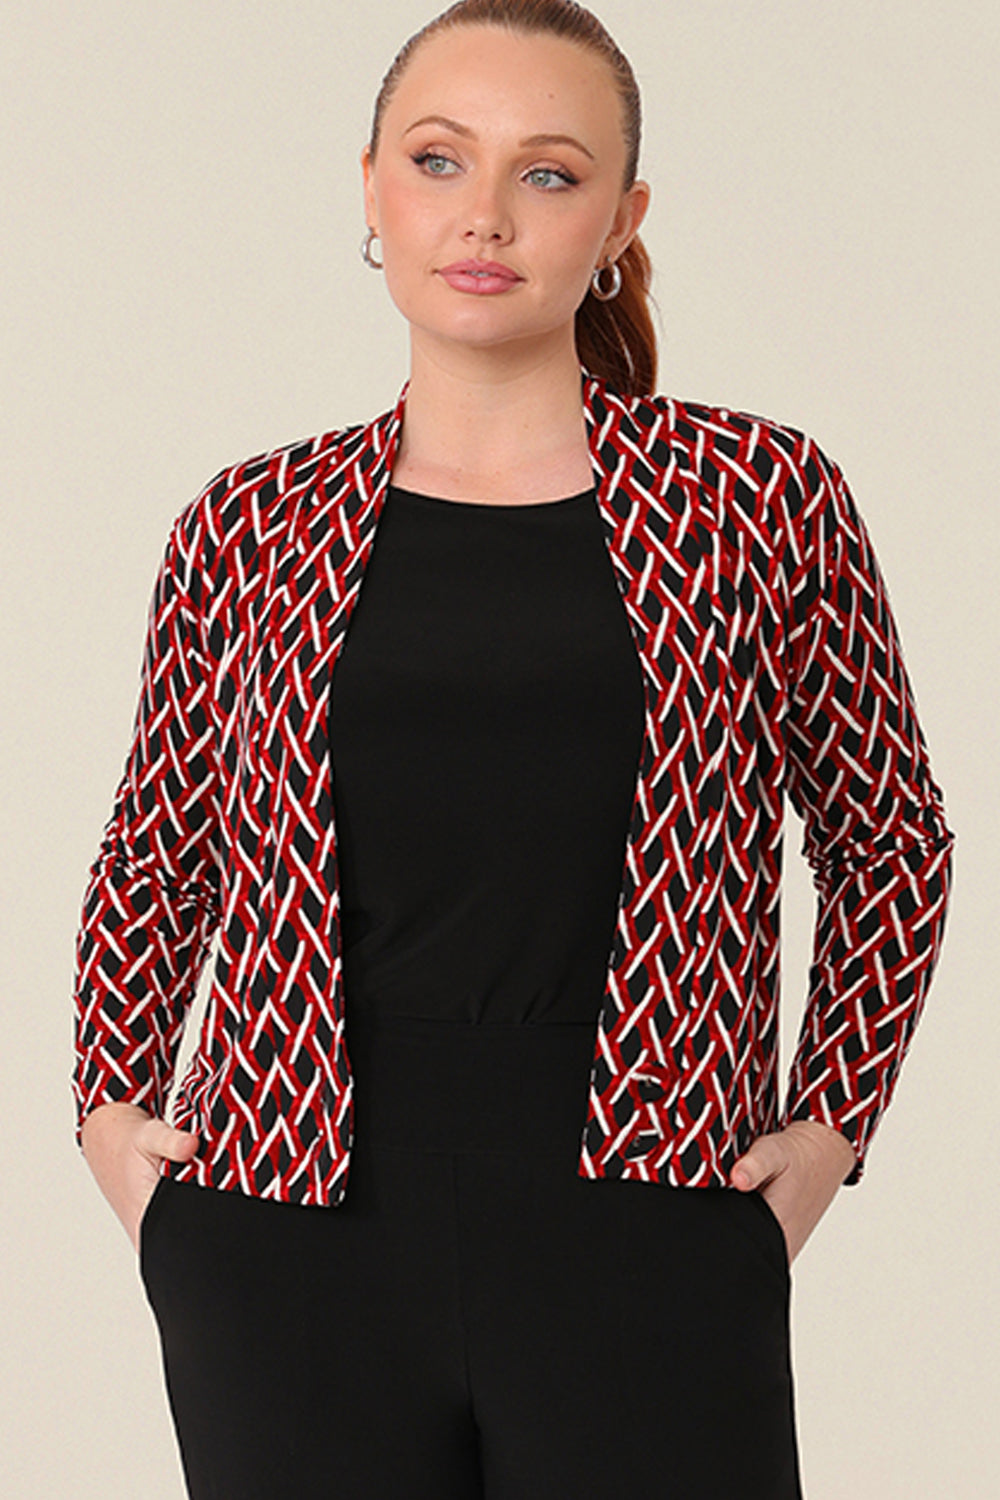 A curvy woman wears a soft jacket/cardigan with long sleeves and covered button fastenings, styled open over a black top . An easy throw on jacket for work, office and casual wear, shop made-in-Australia workwear petite to plus sizes